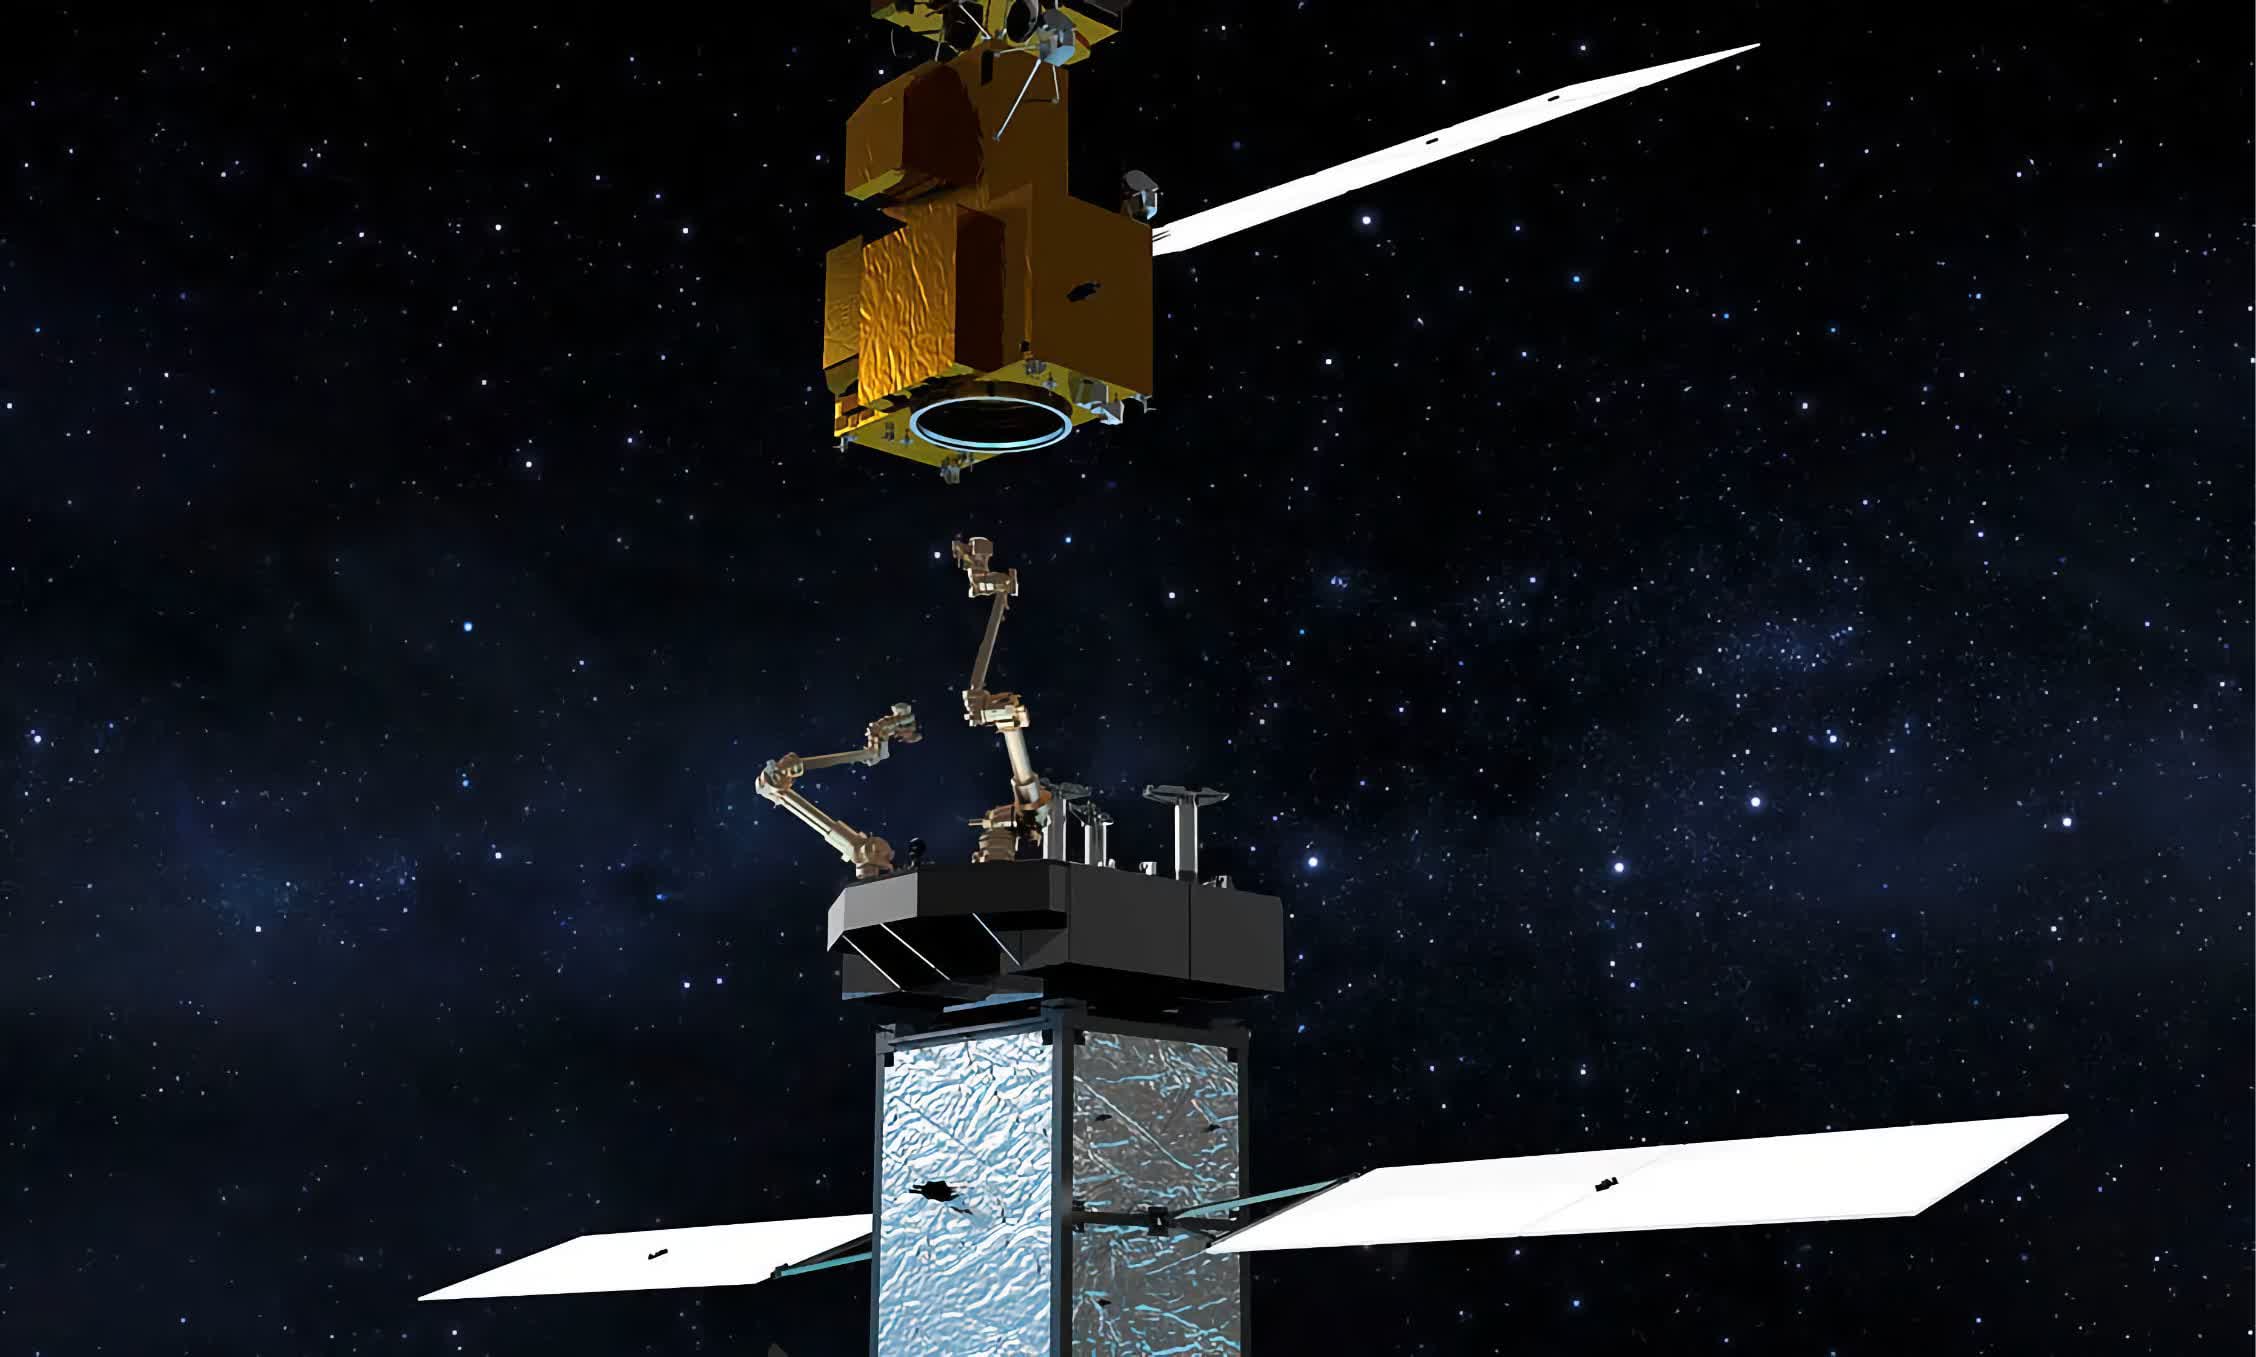 Robots could soon autonomously repair and service satellites in orbit thumbnail